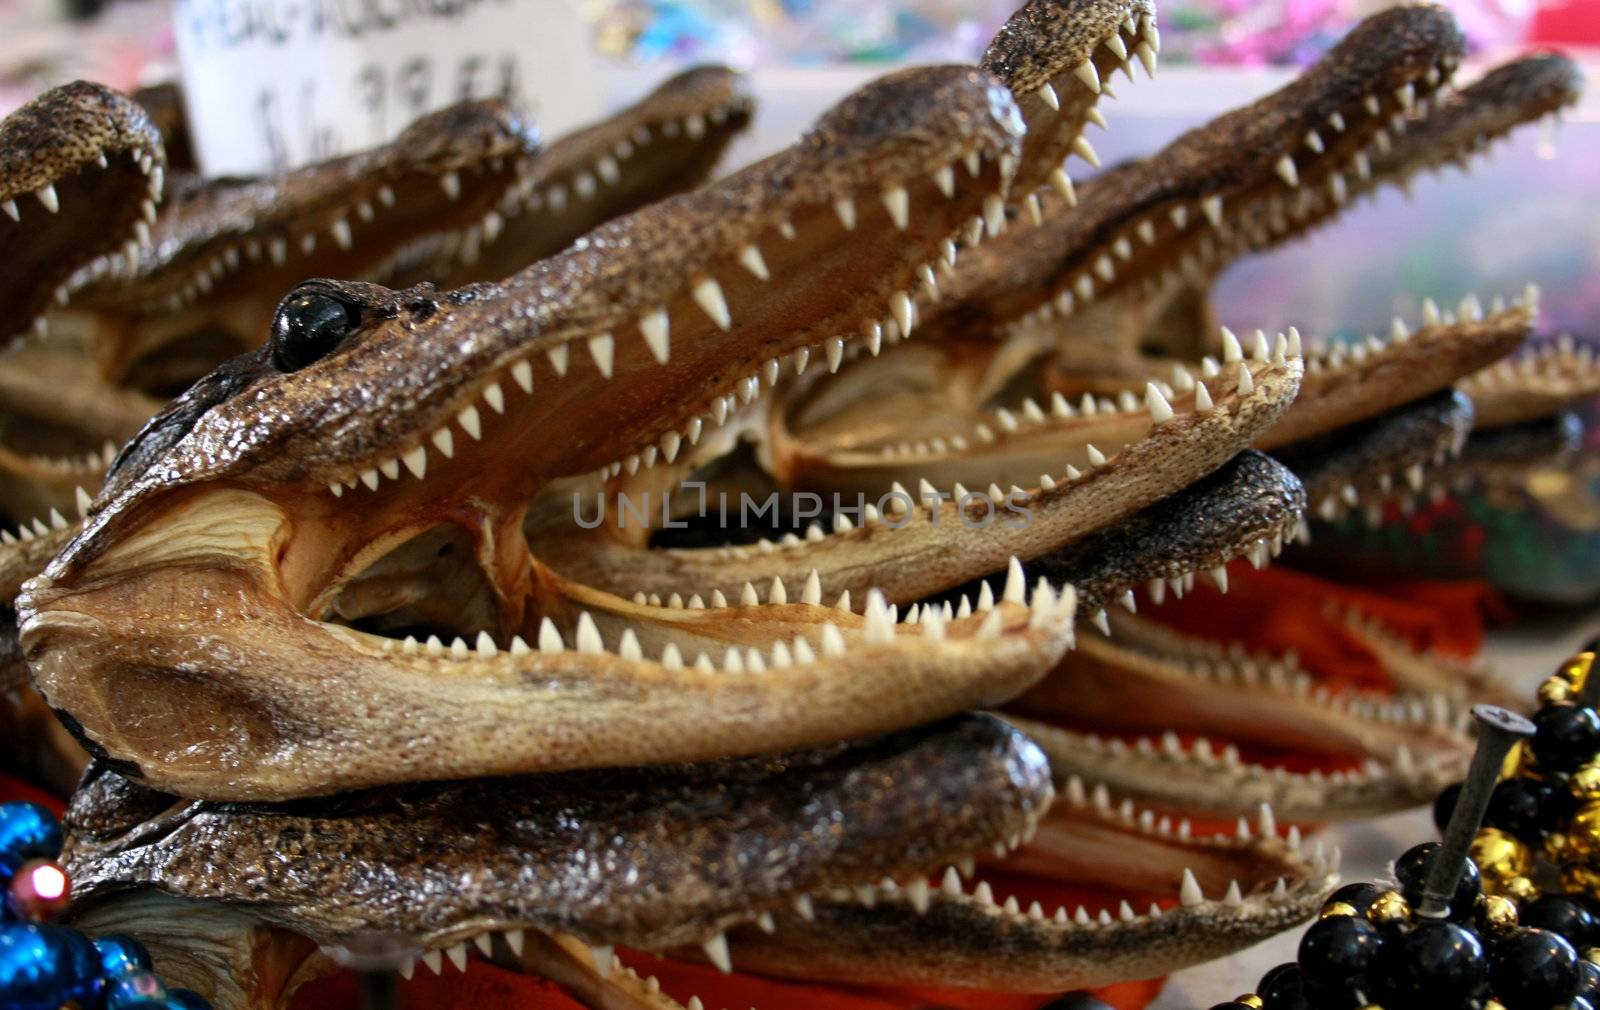 A pile of Alligator heads for sale in New Orleans